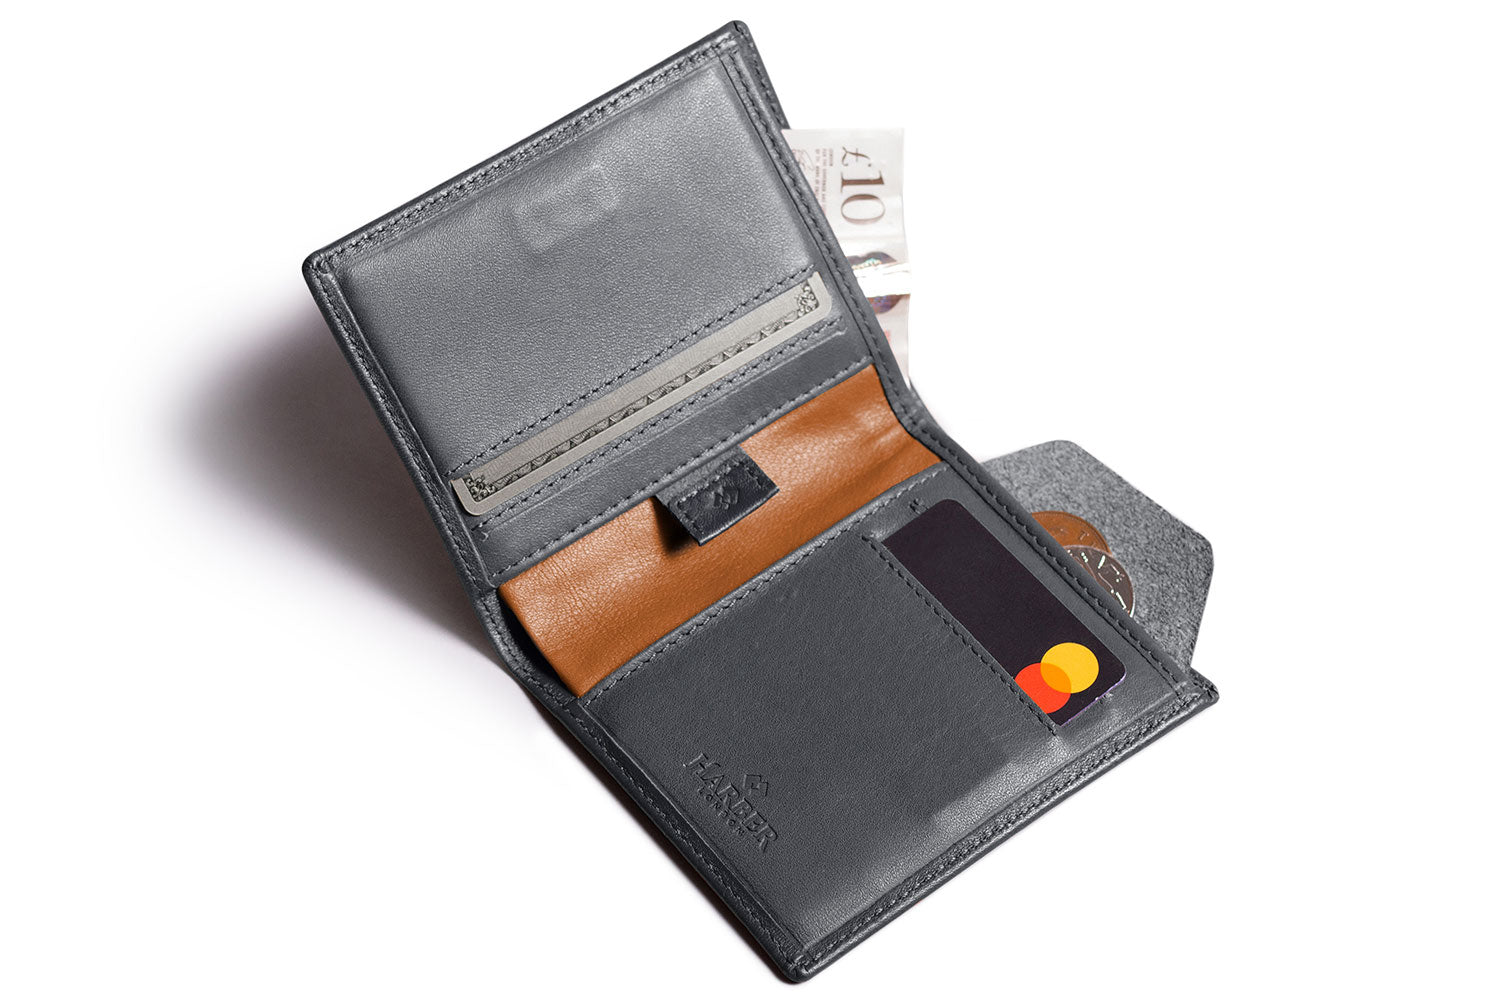 Review: Nomad's Bifold Wallet Will Hold All Your Essentials 